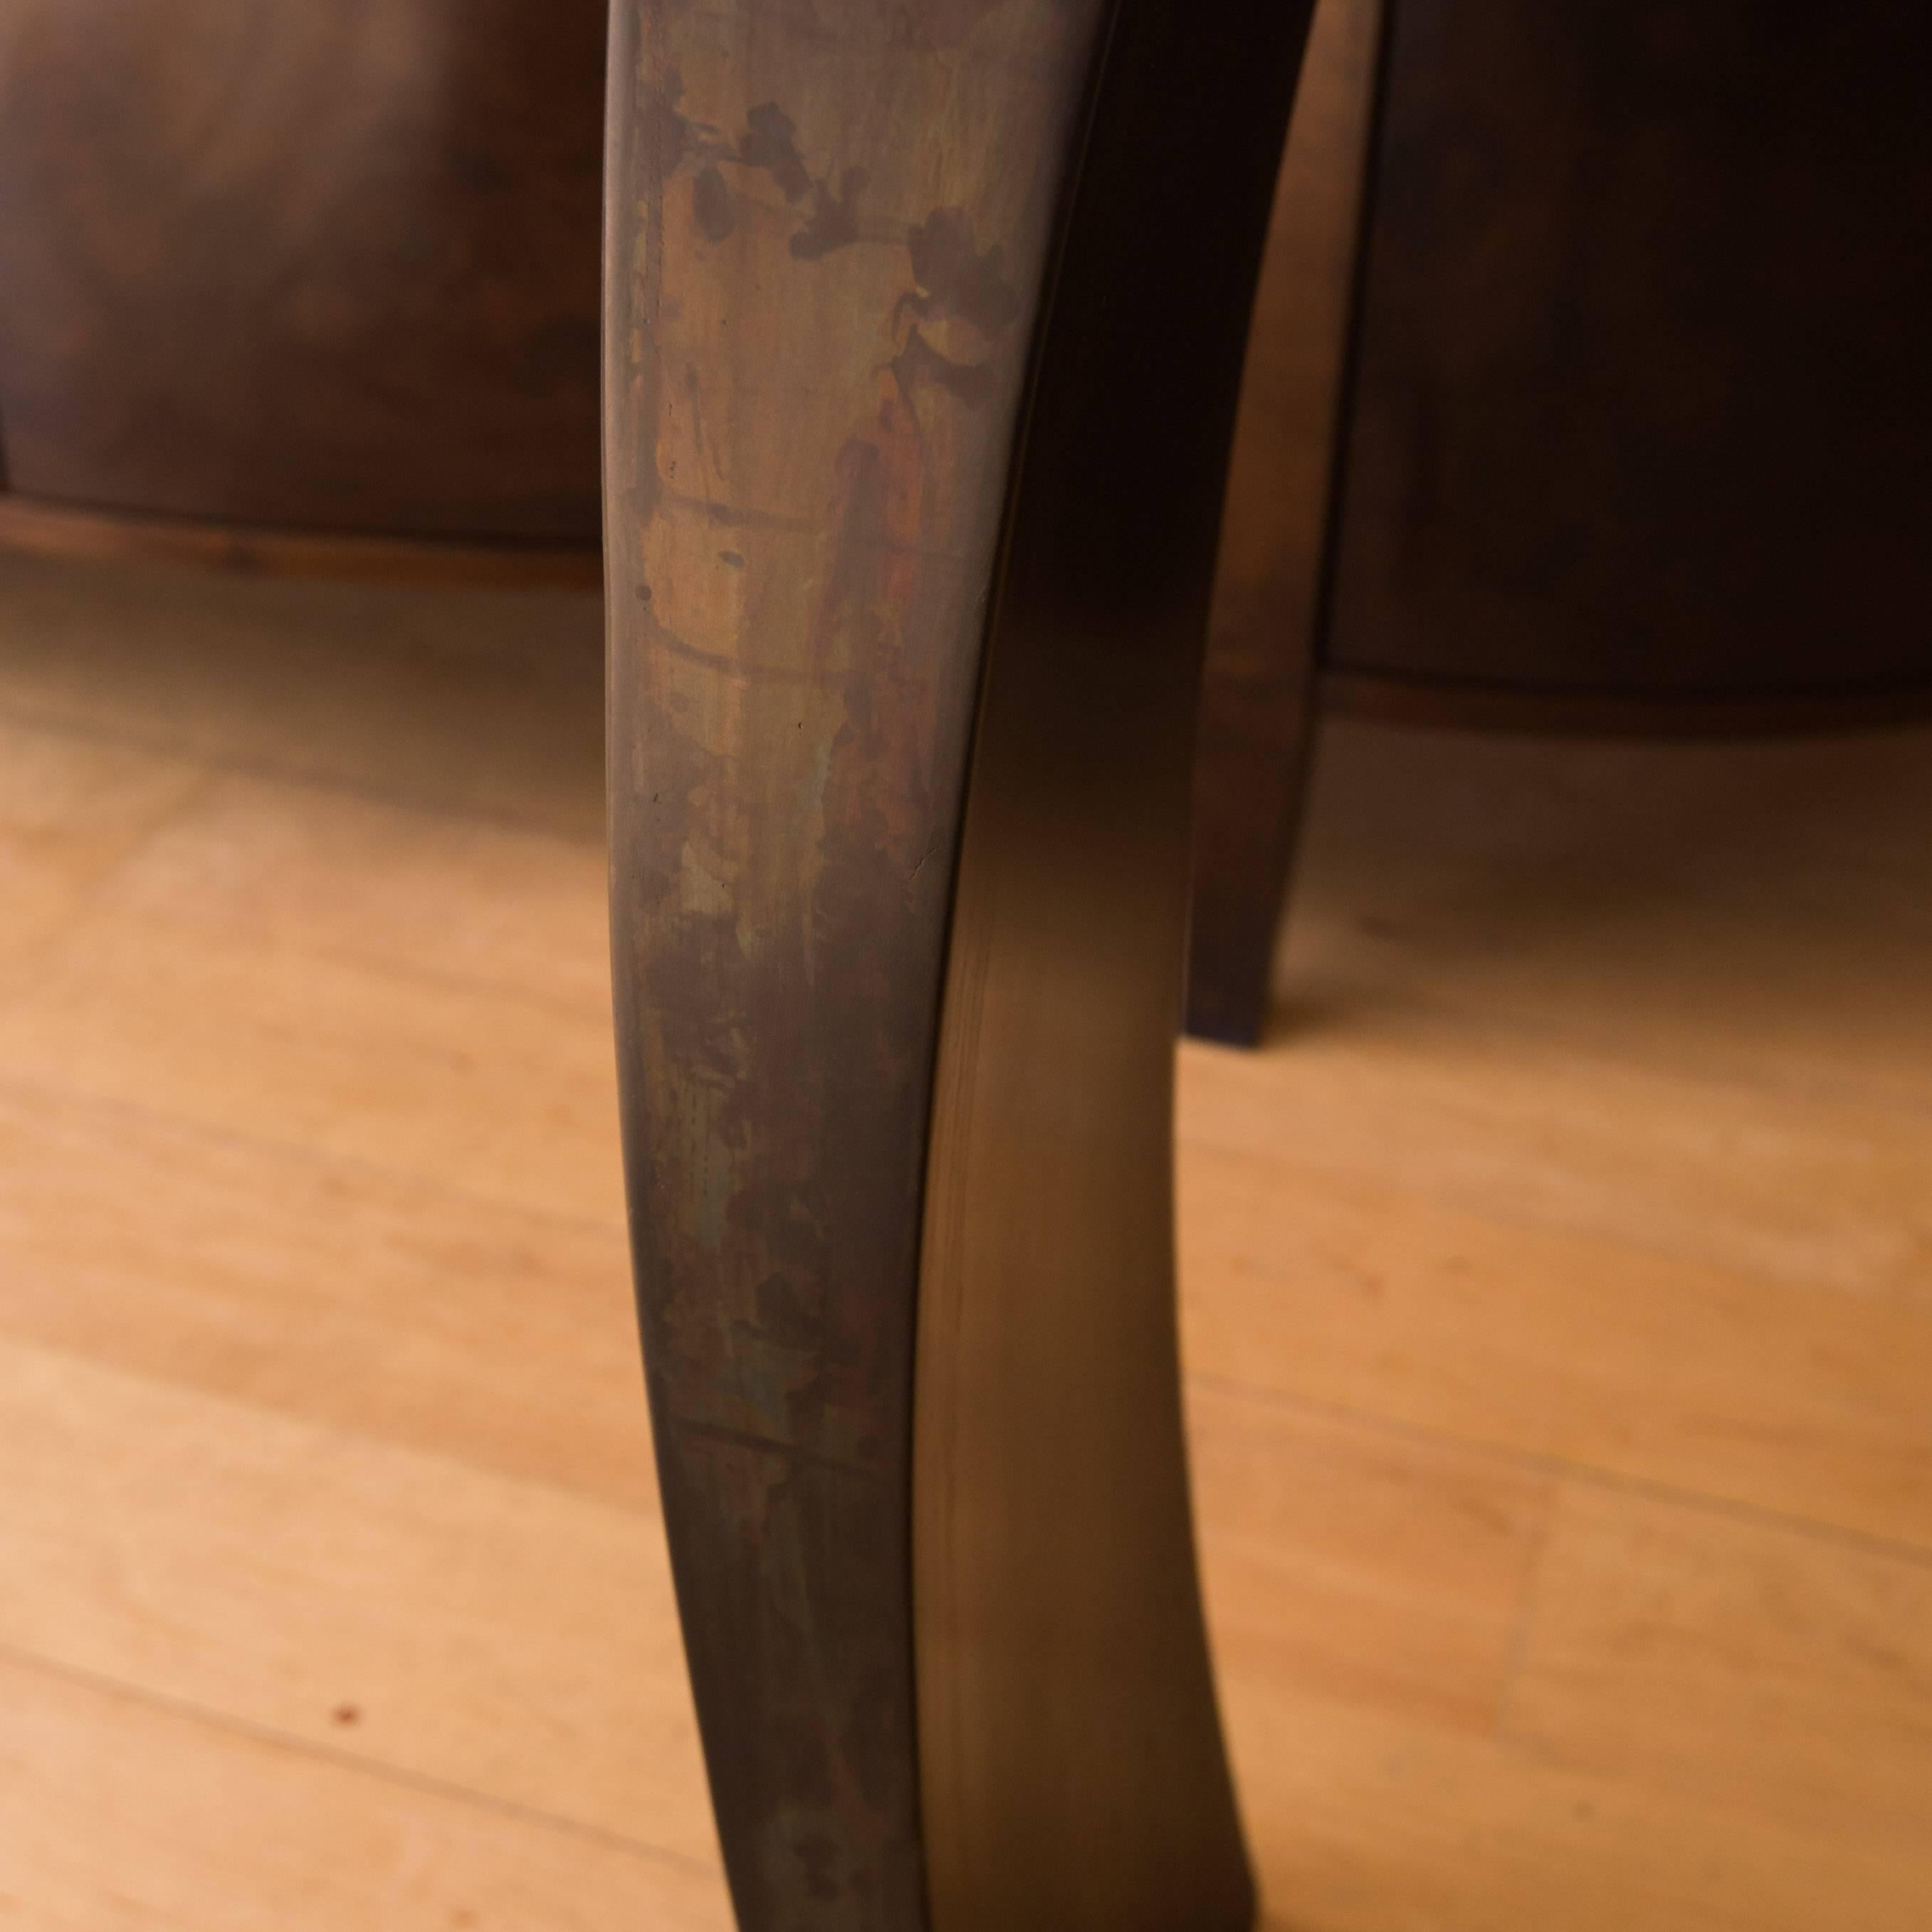 This accent piece, designed and built by Connecticut master furniture maker Gregory Clark, will be noticed in any room it's placed. This console table features a Ziricote wood top secured between two patinated hand-formed steel legs.